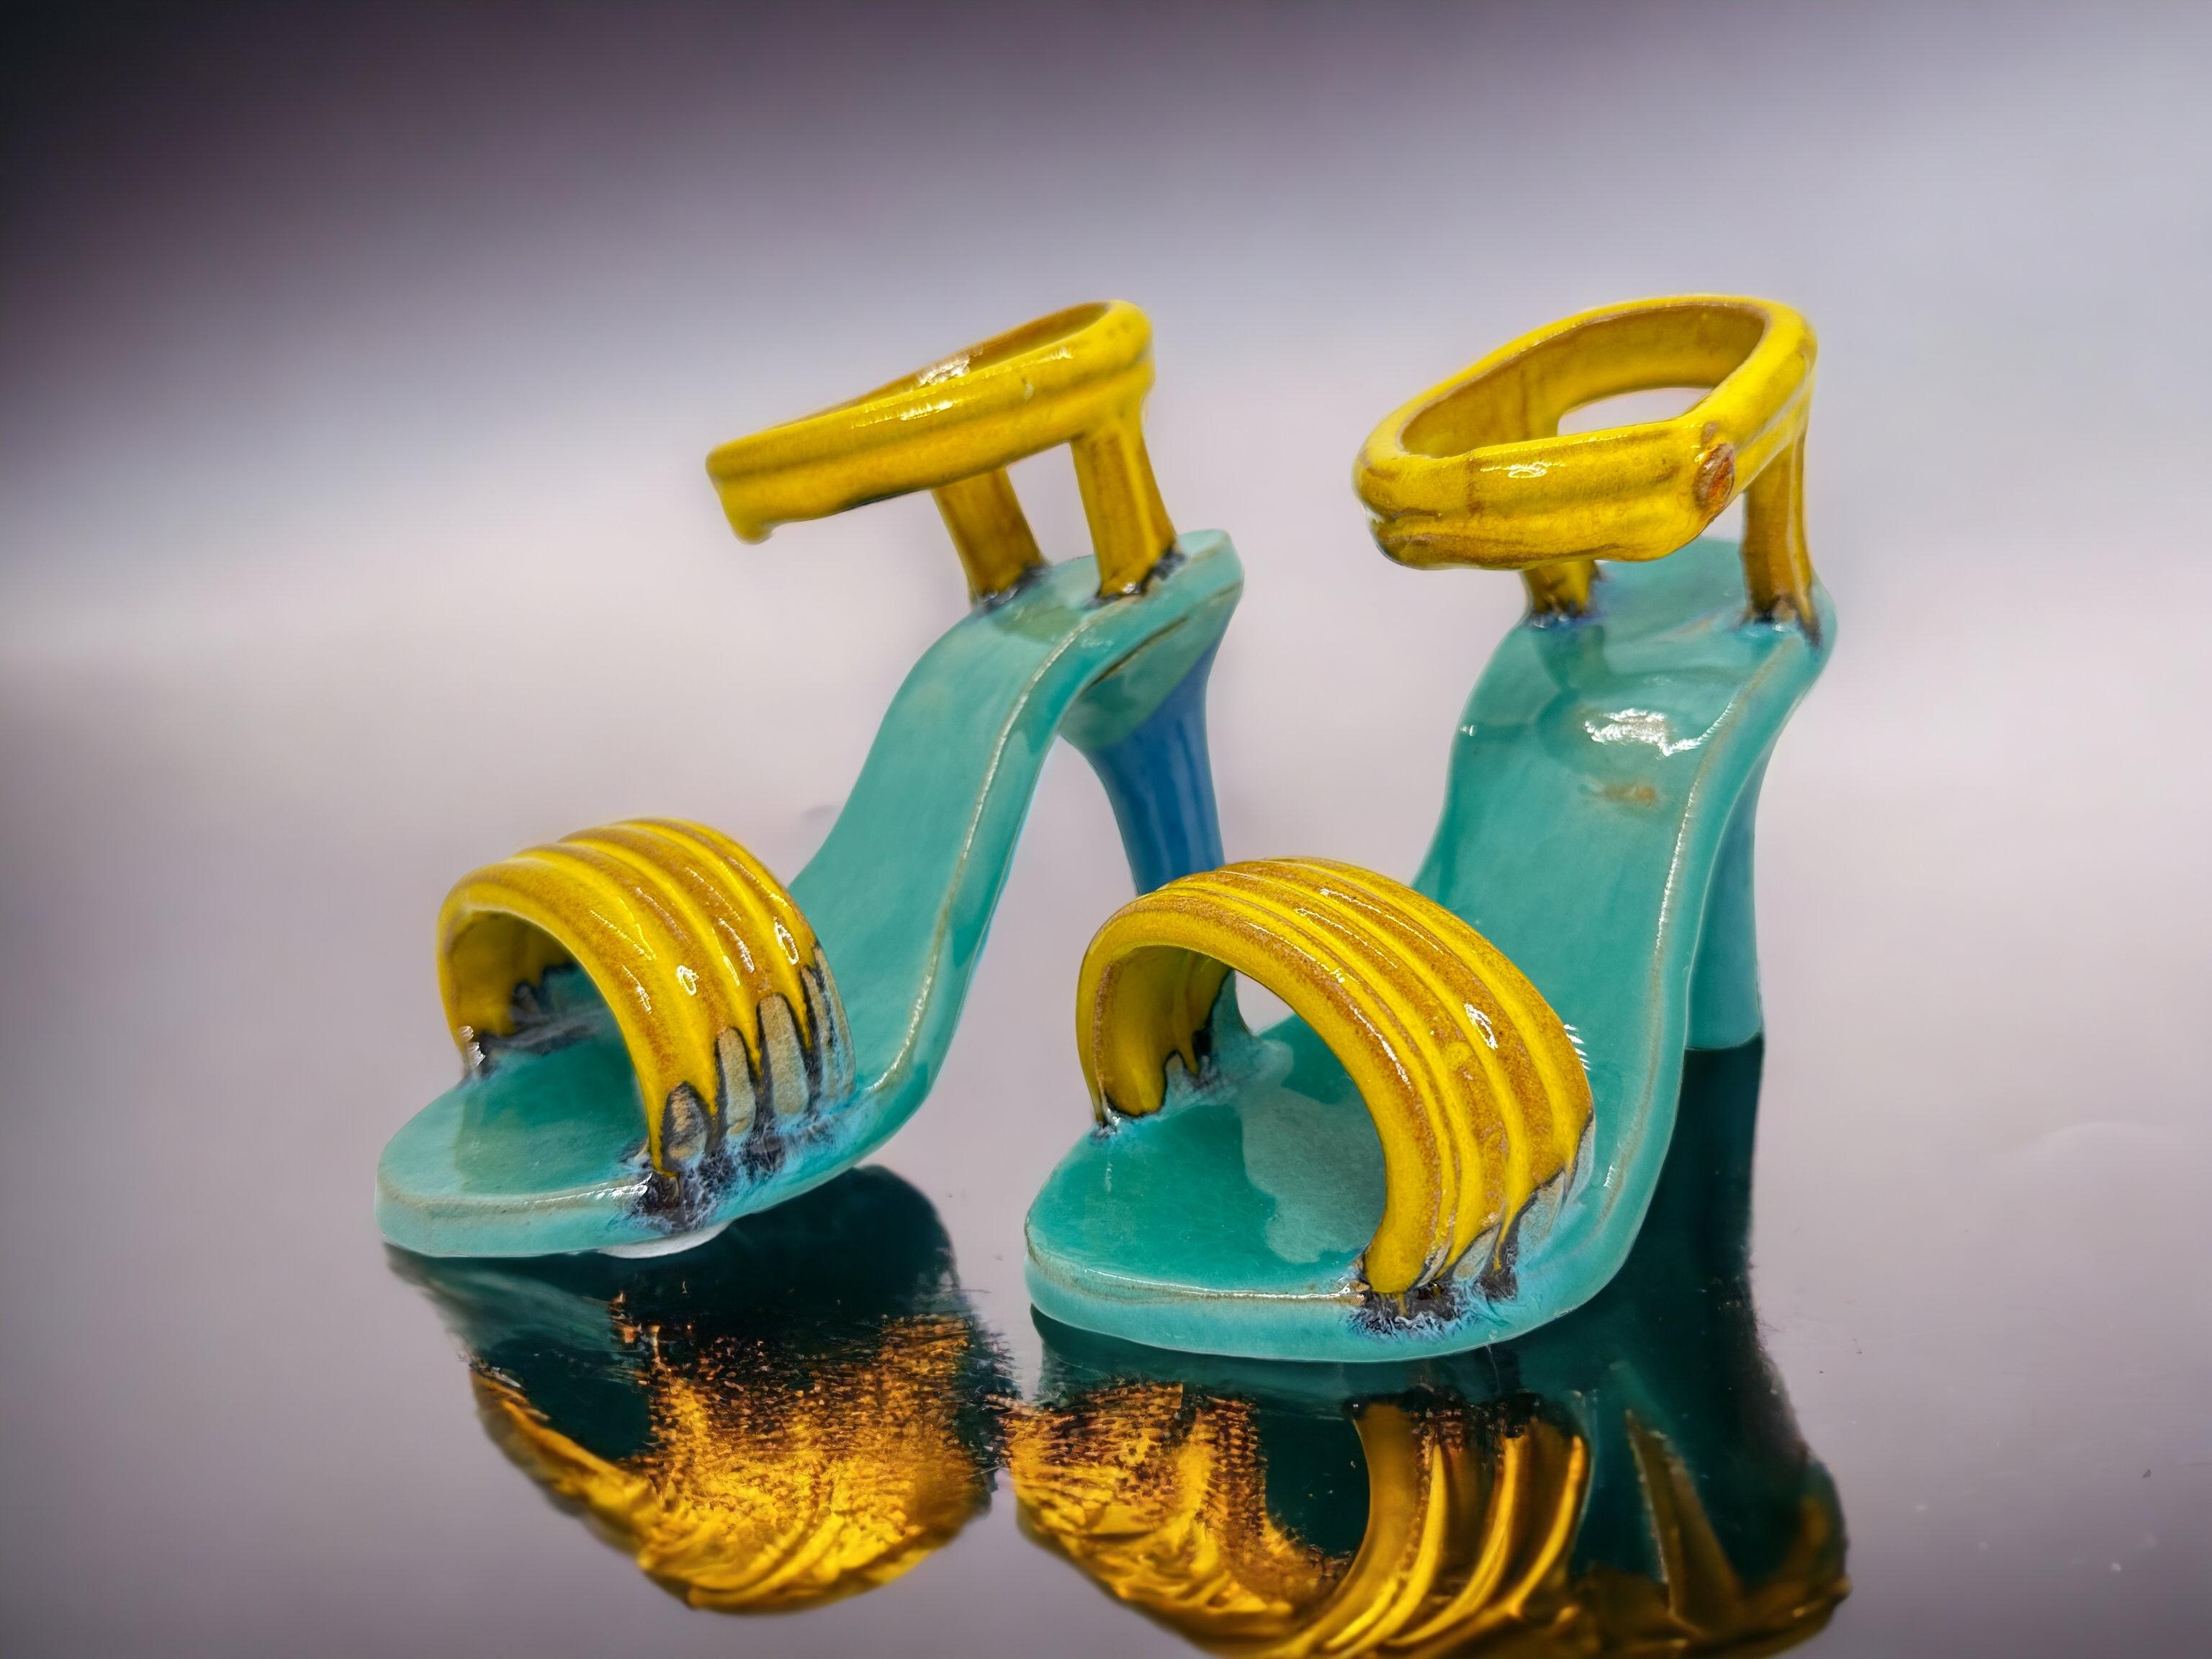 This offer is for a pair of ceramic high heels, an exceptional piece made in Austria during the Bosse era in the 1960s. They are glazed in typical midcentury colors of yellow and turquoise. A beautiful display piece to show the style of the period.